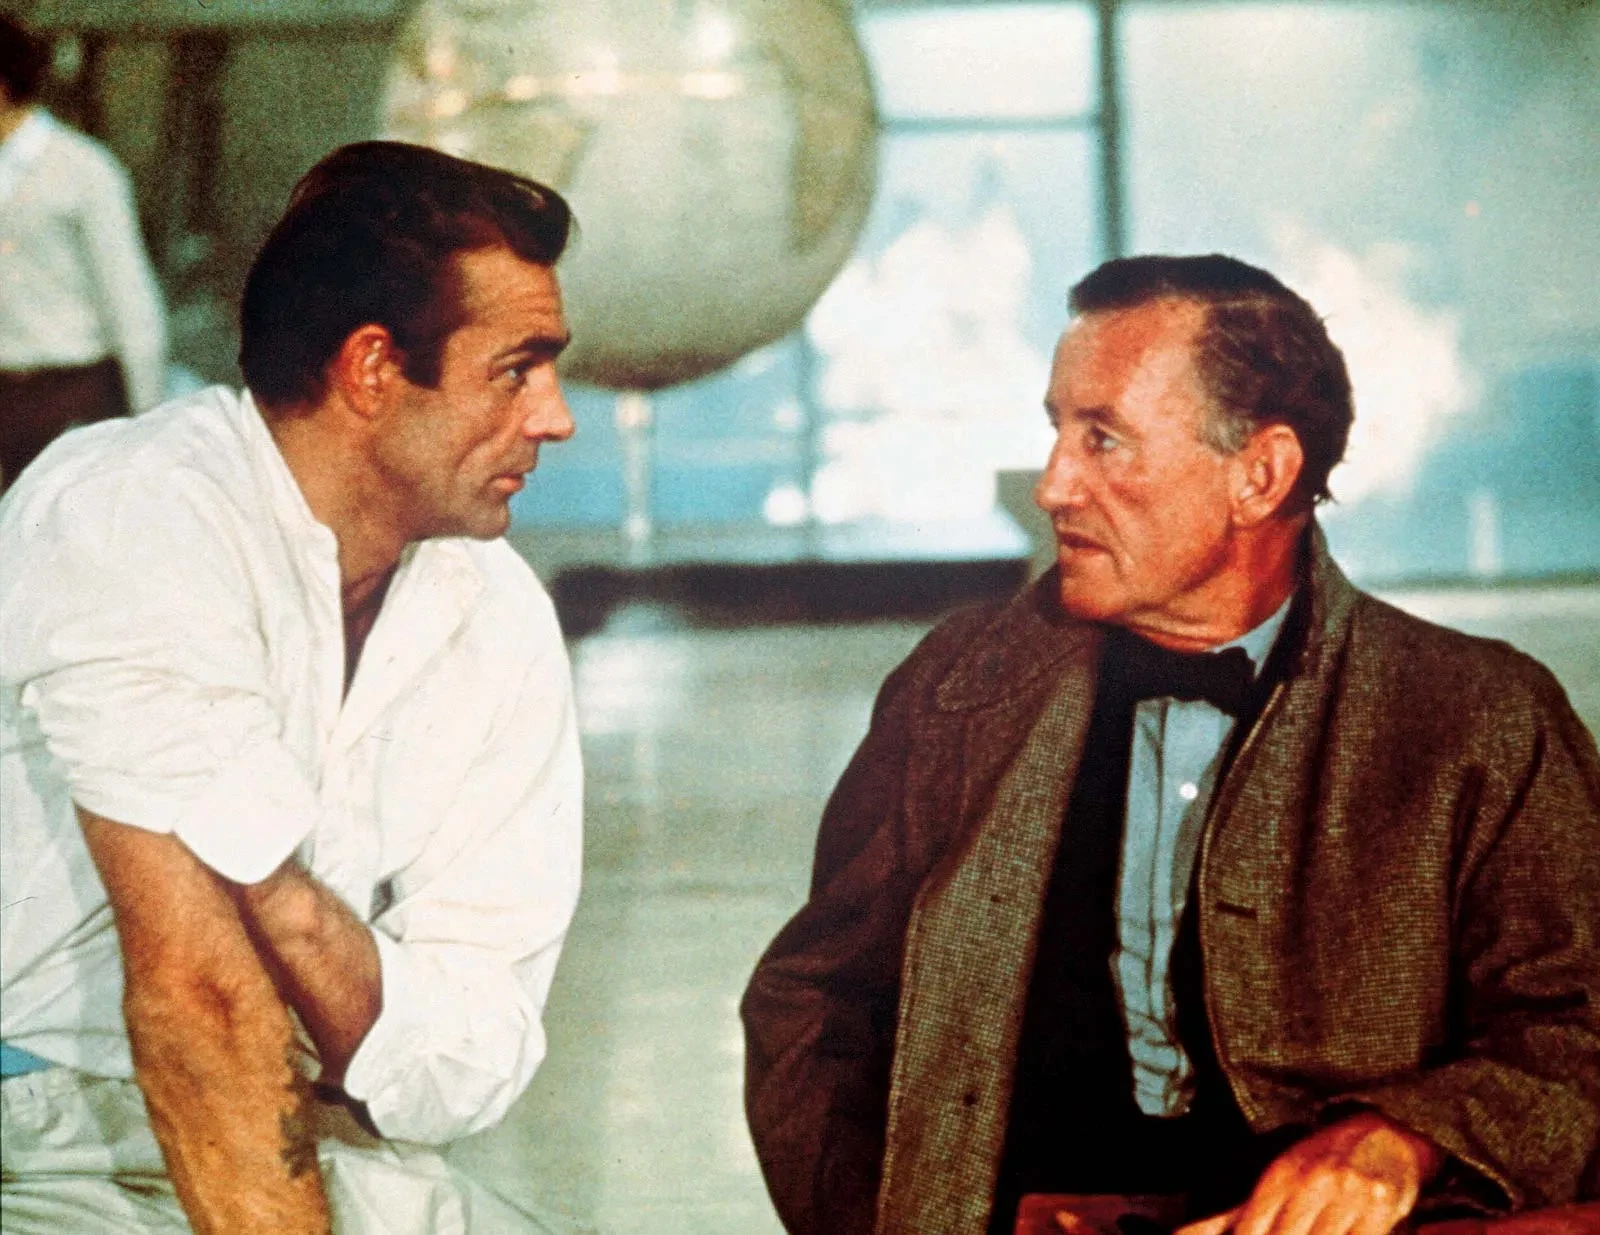 Ian Fleming with Sean Connery | Credits: United Artists